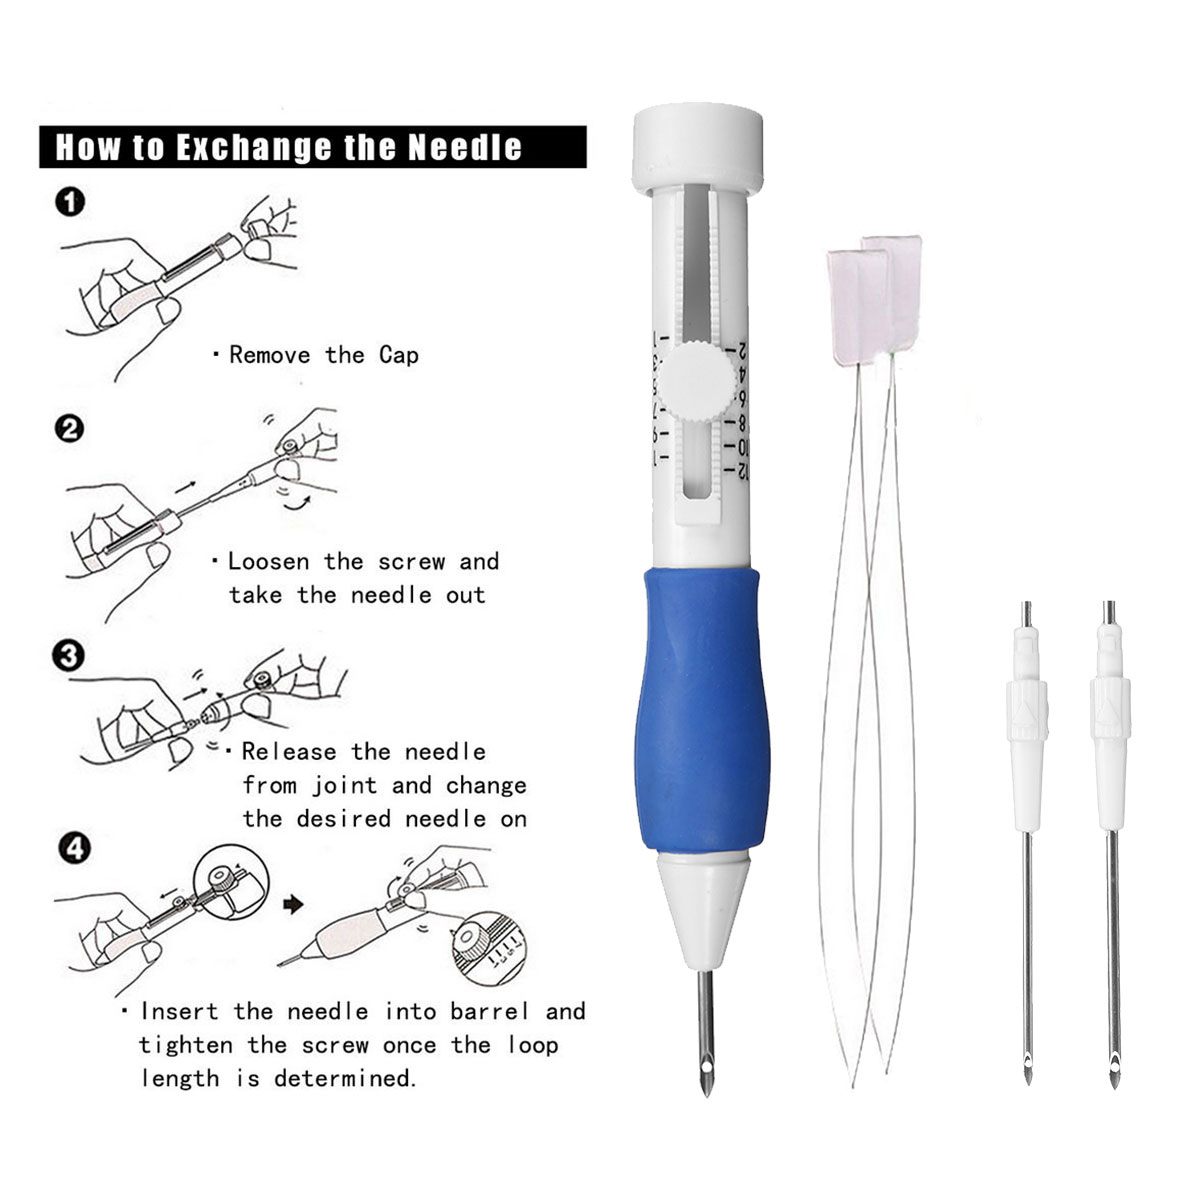 Magic-Embroidery-Pen-Punch-Needle-Set-Embroidery-Patterns-Punch-Needle-Kit-Knitting-Sewing-DIY-Tool-1304510